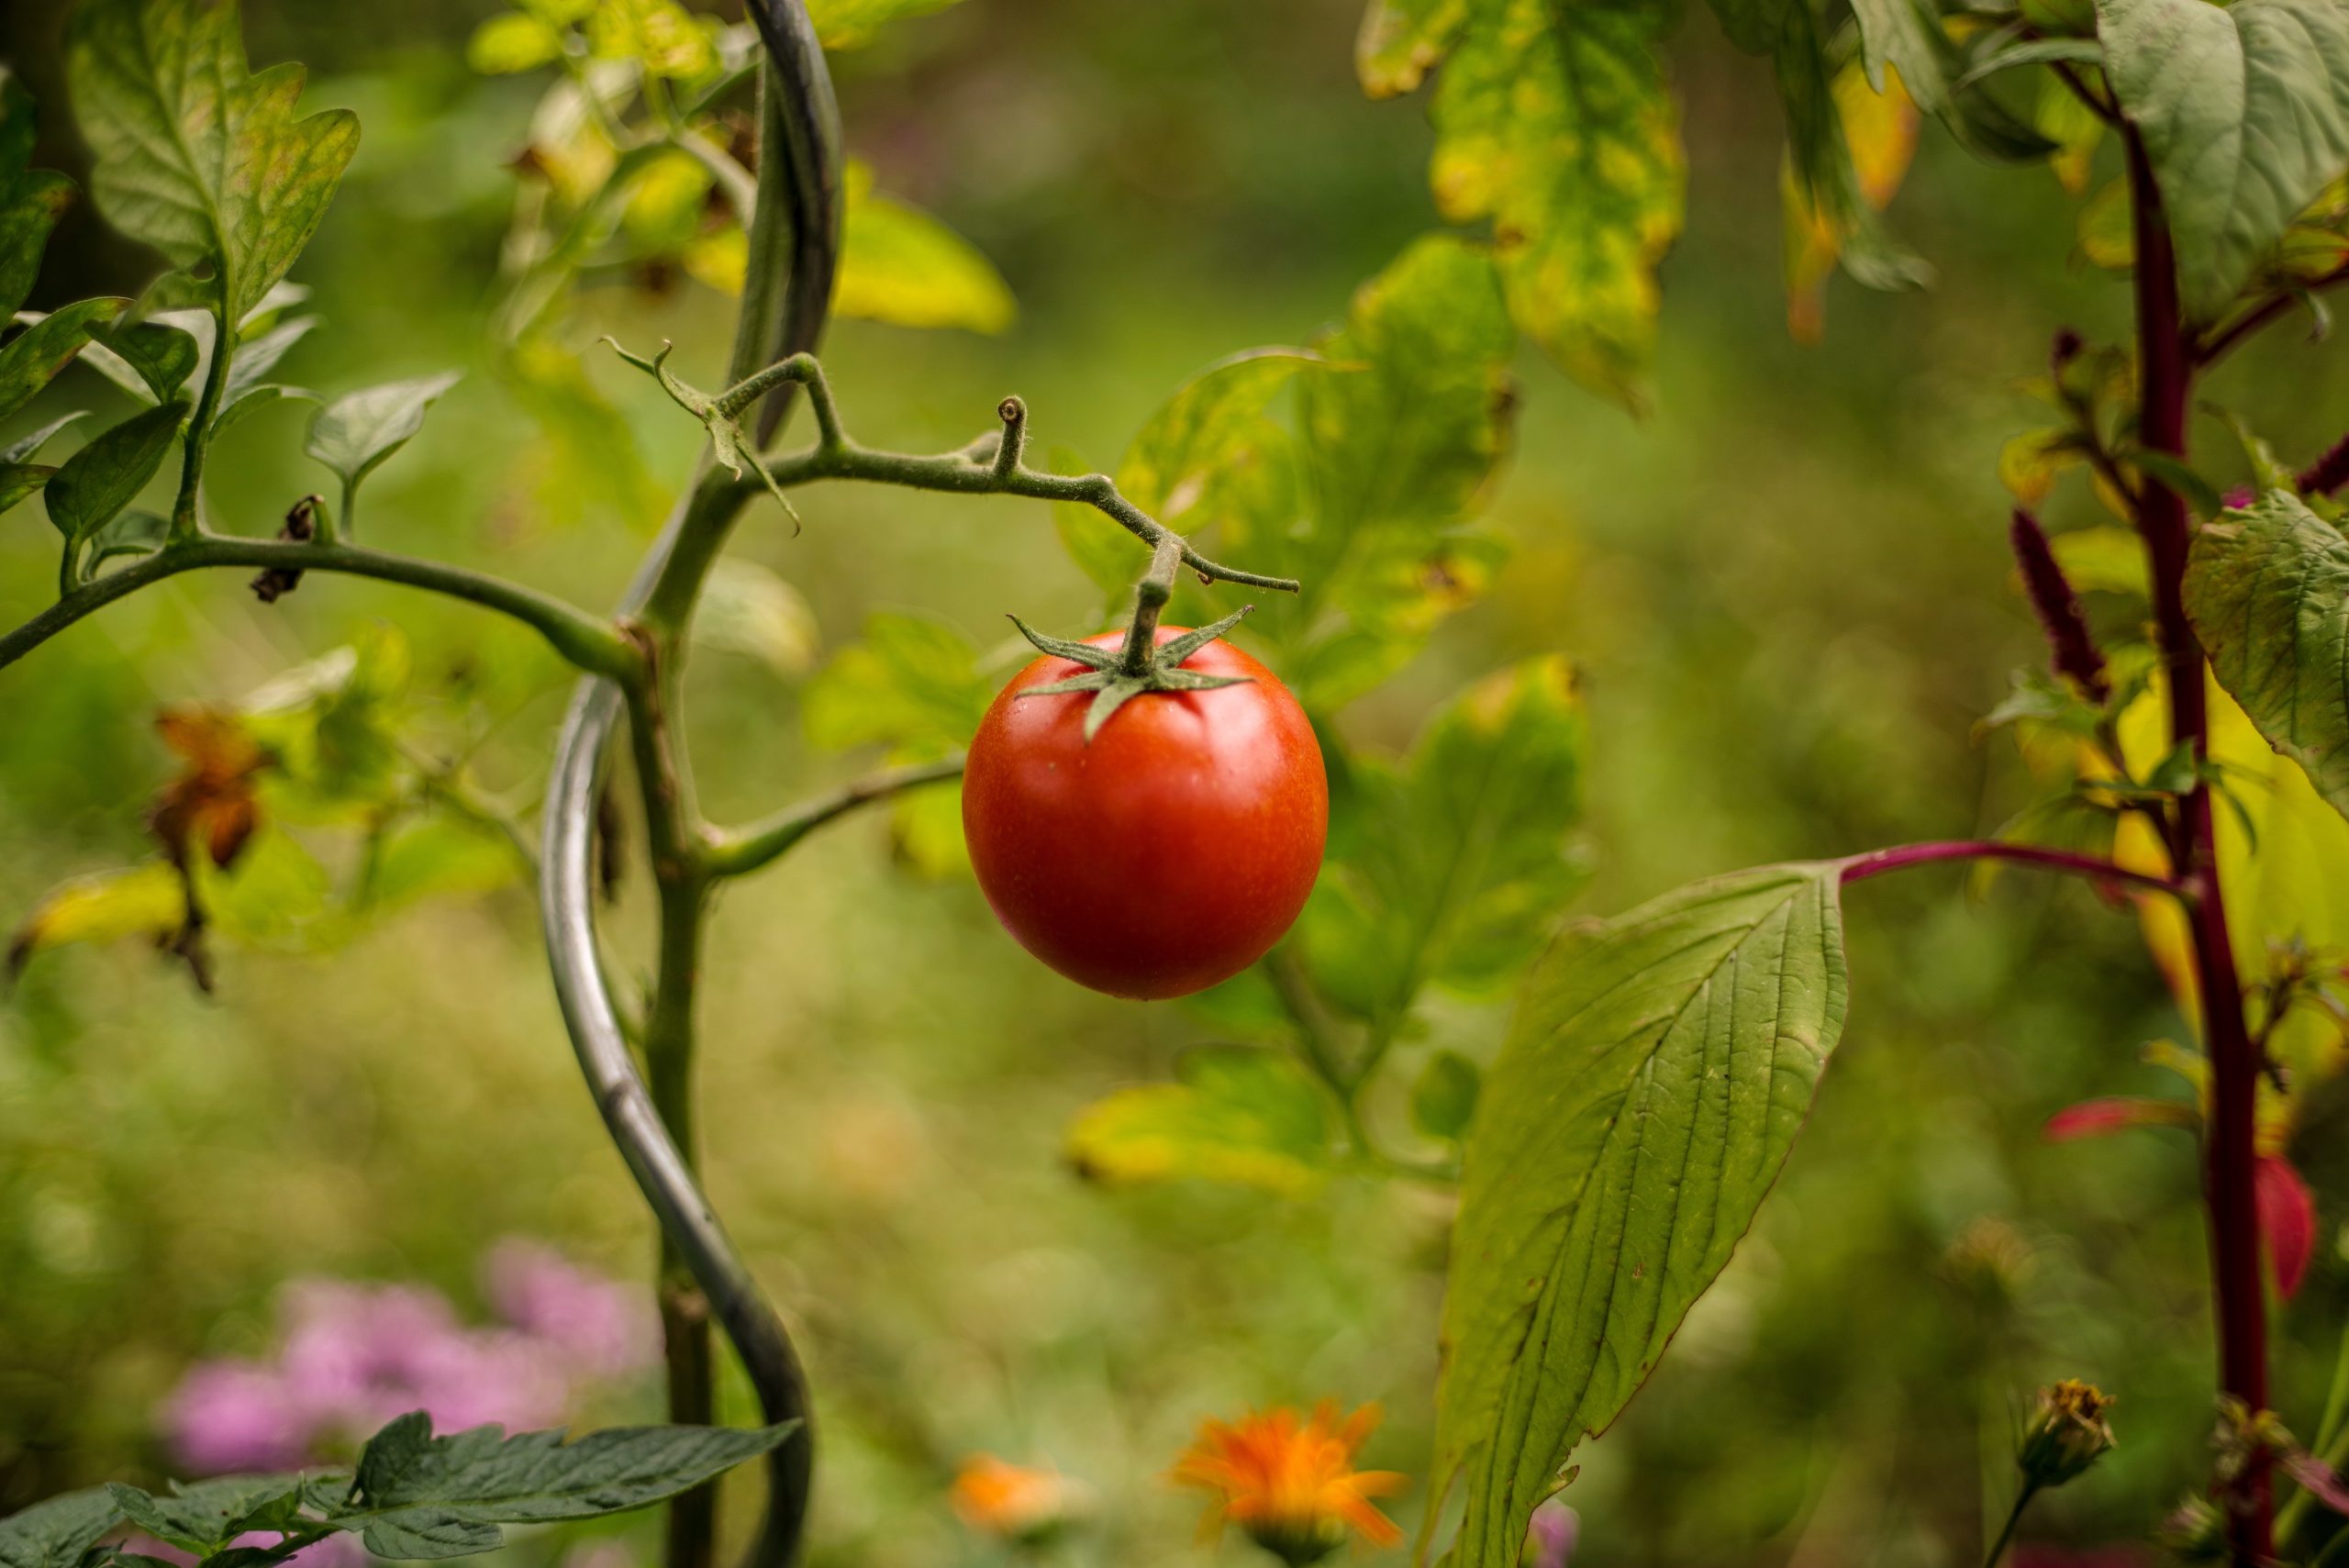 red tomato on green leaf plant during daytime